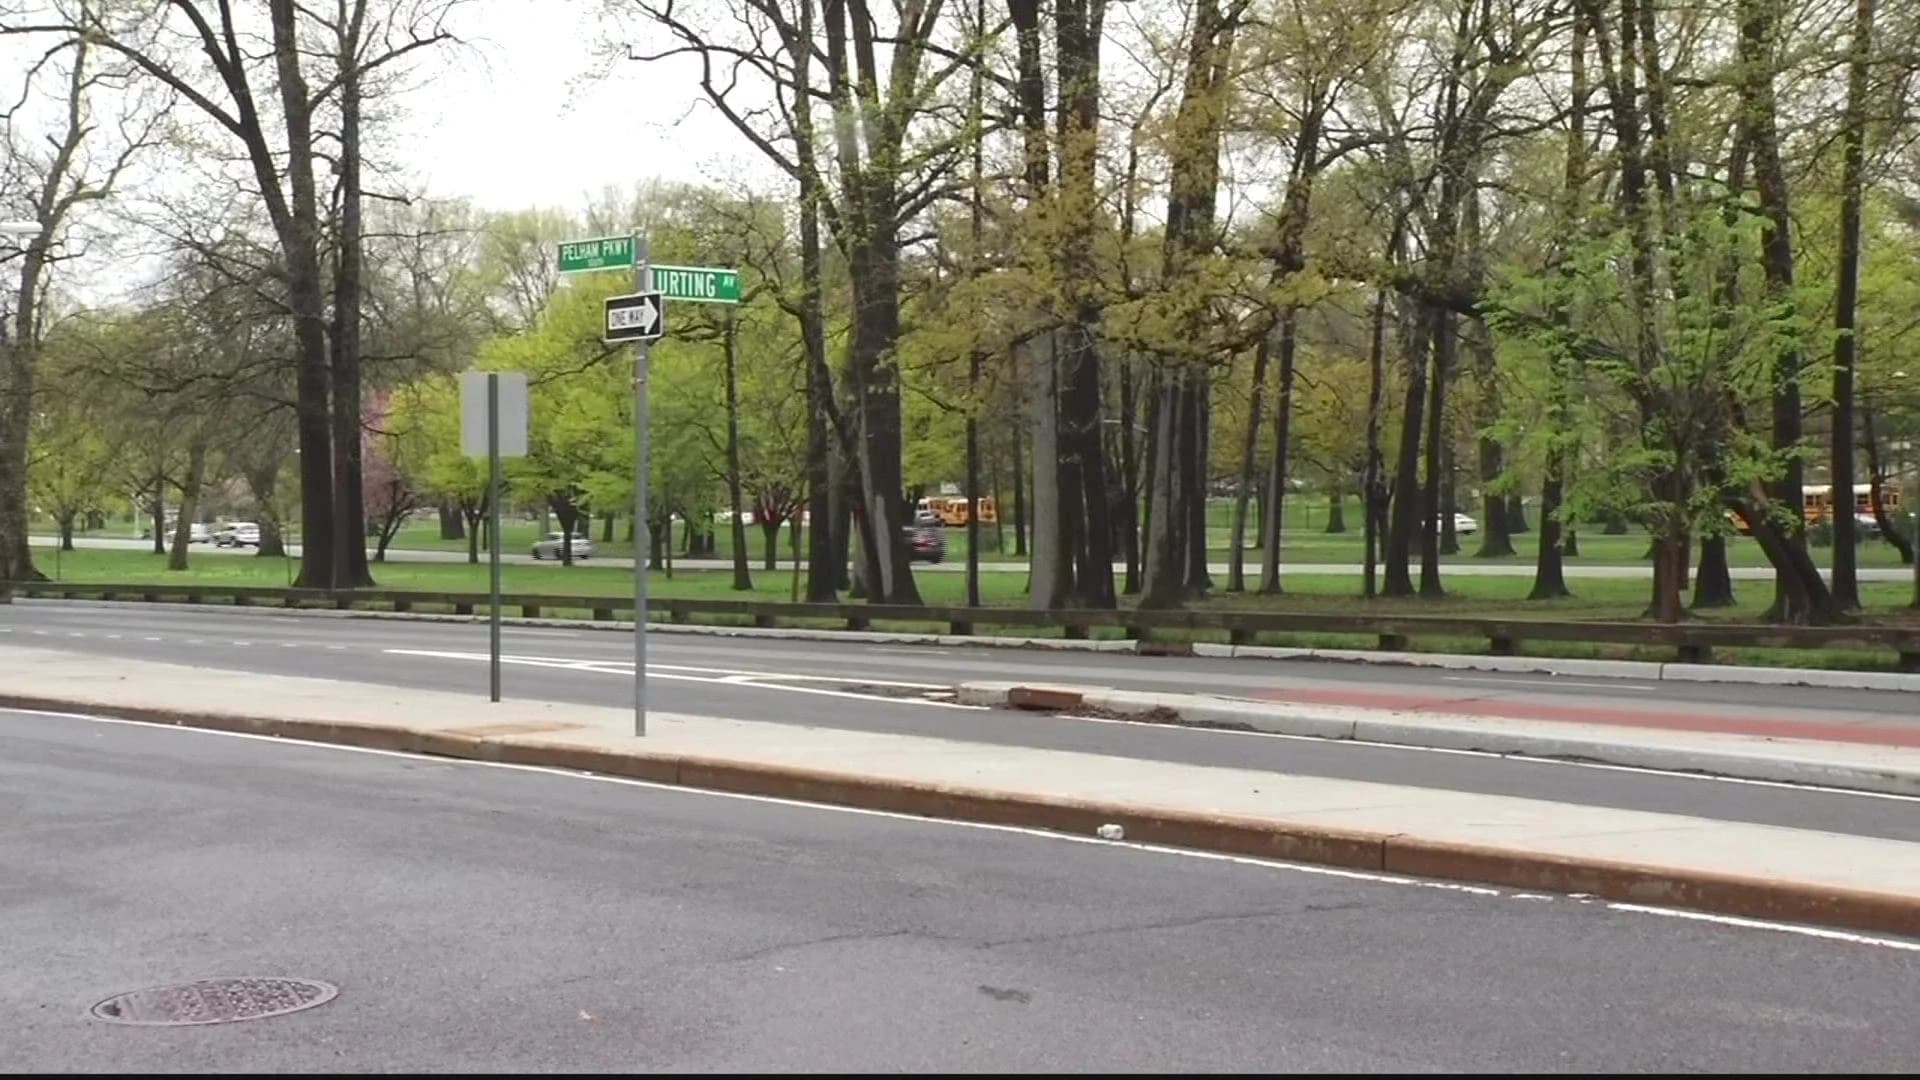 Phase two of Pelham Parkway renovation hits bumpy road